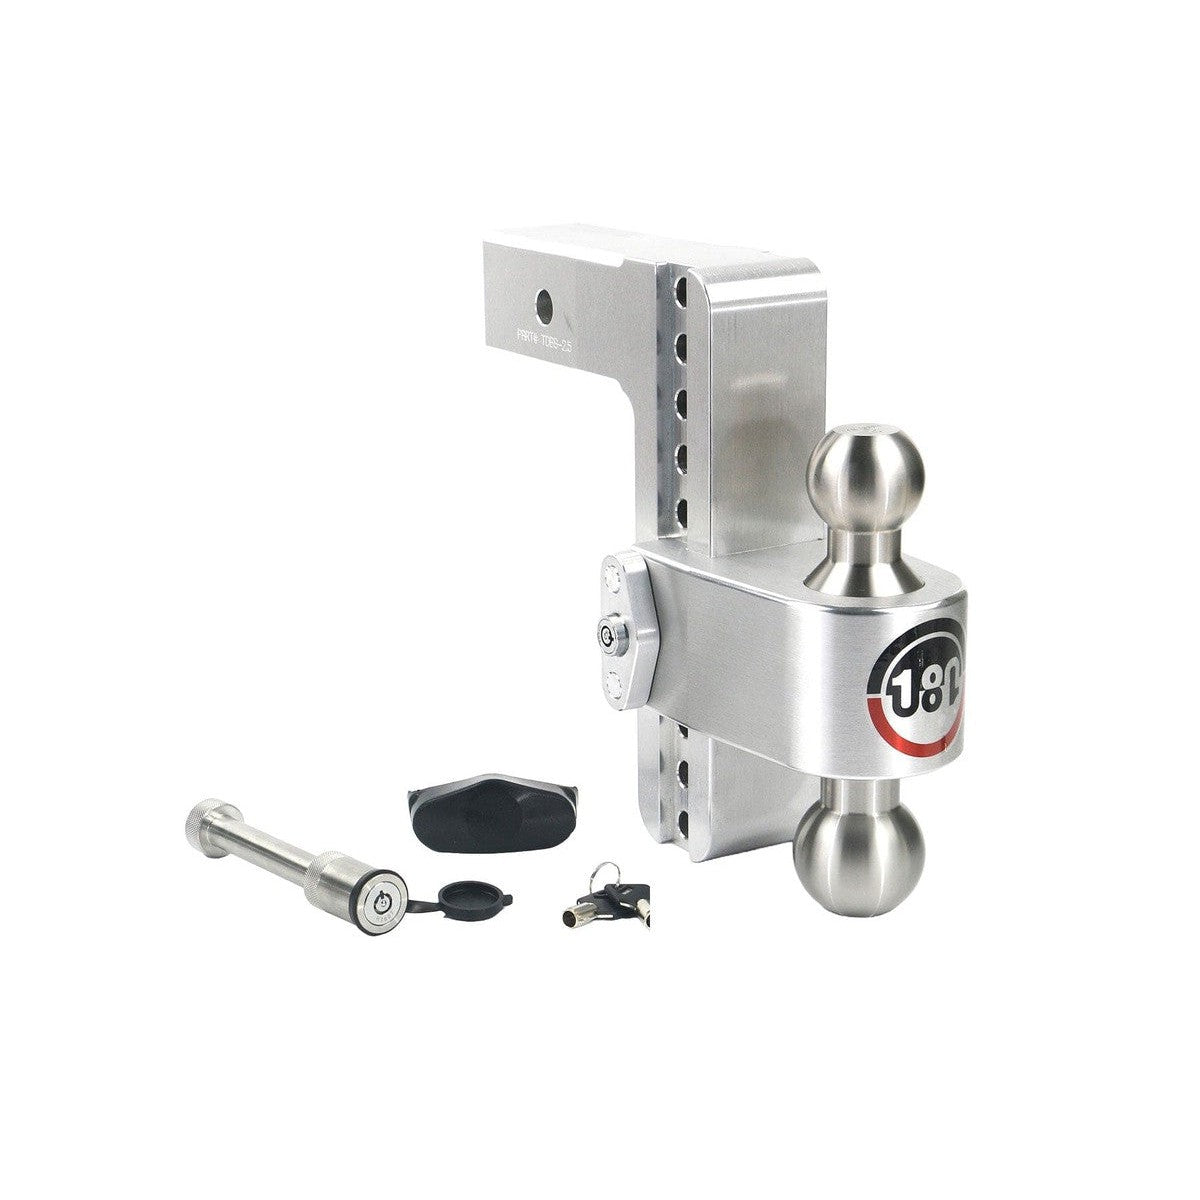 Weigh Safe Qualifies for Free Shipping Weigh Safe 180 Drop Hitch with SS Tow Ball 8" Drop for 2.5" & WS05 #LTB8-2.5-KA